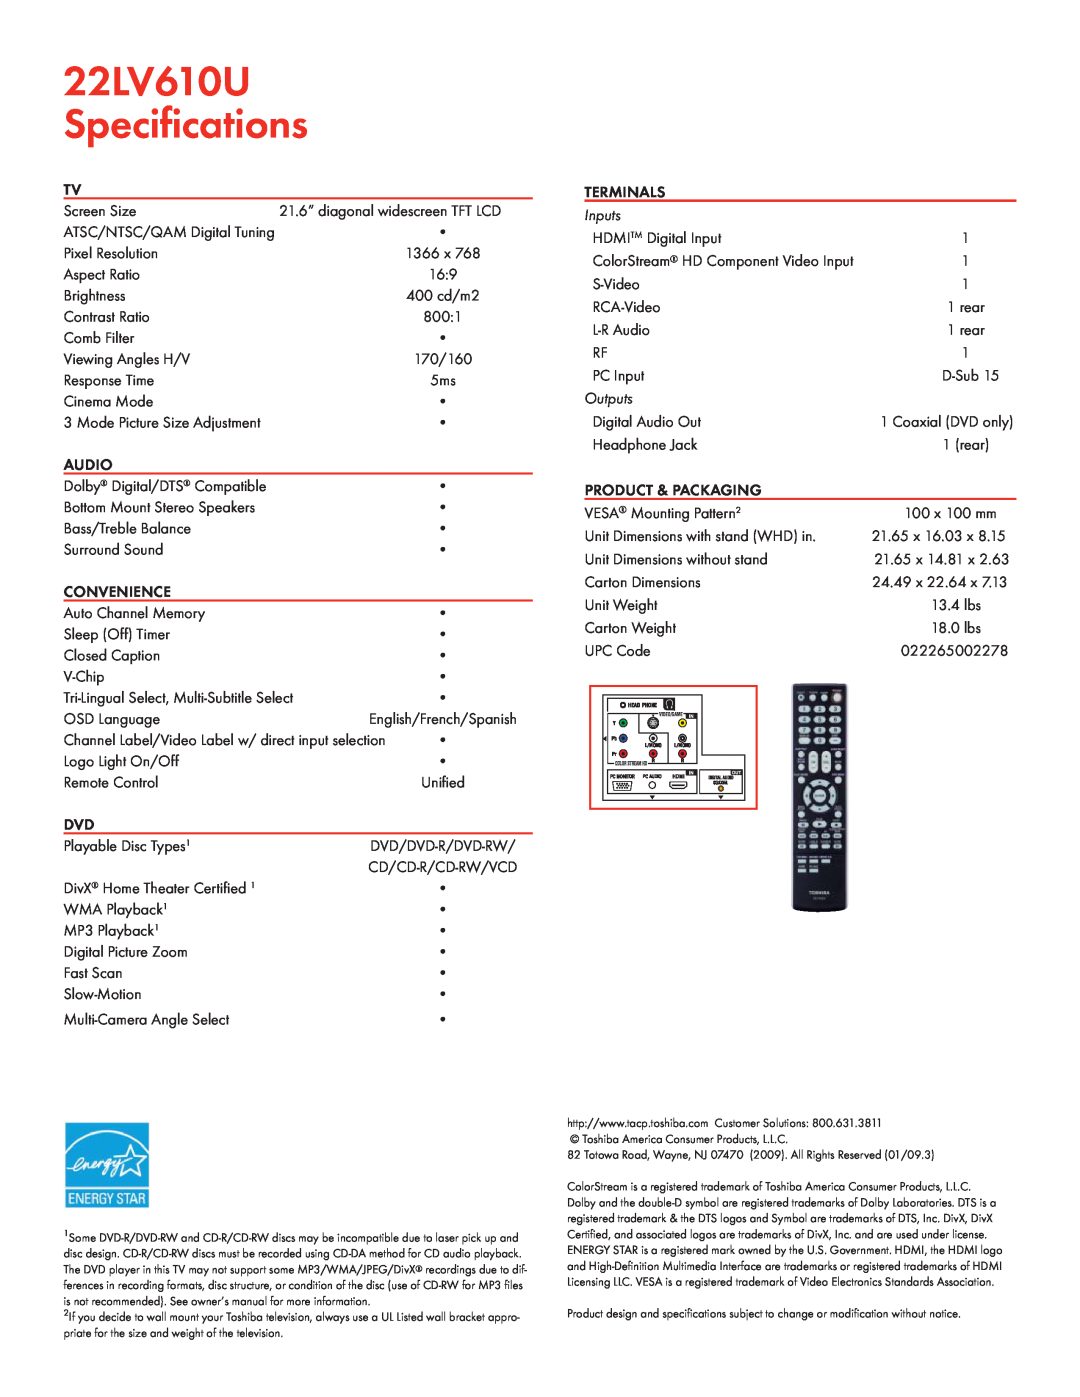 Toshiba manual 22LV610U Speciﬁcations, Audio, Convenience, Terminals, Inputs, Outputs, Product & Packaging 